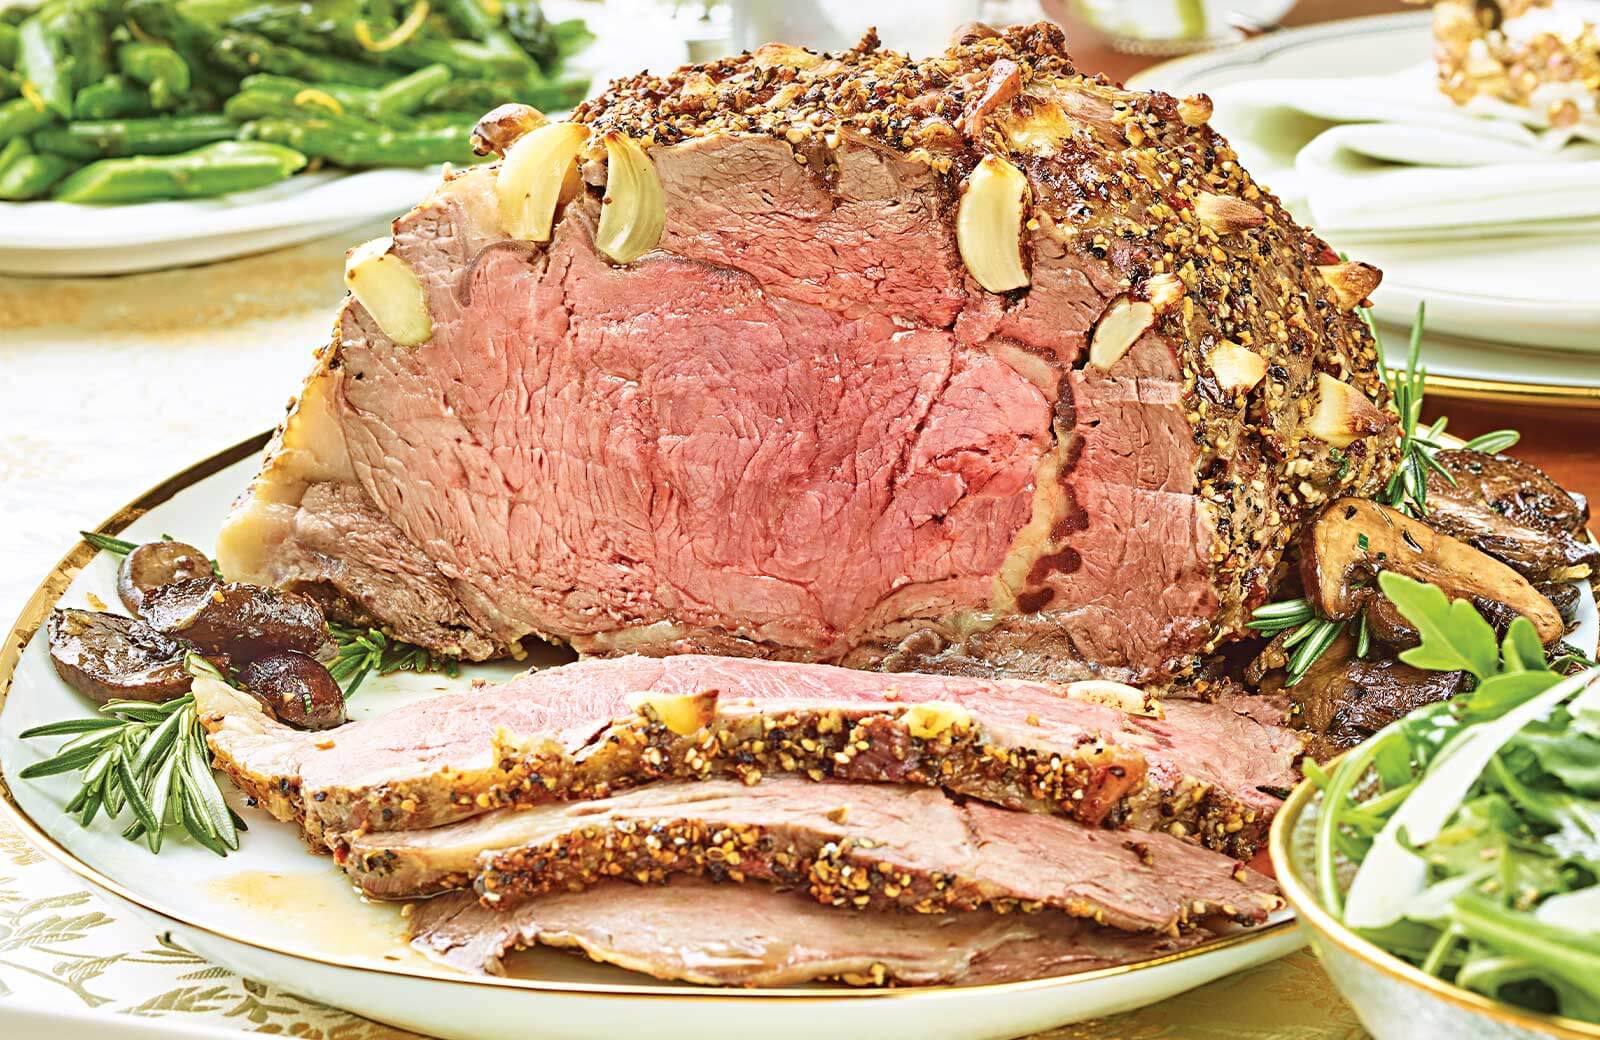 Follow link to order rib roast on meals 2go